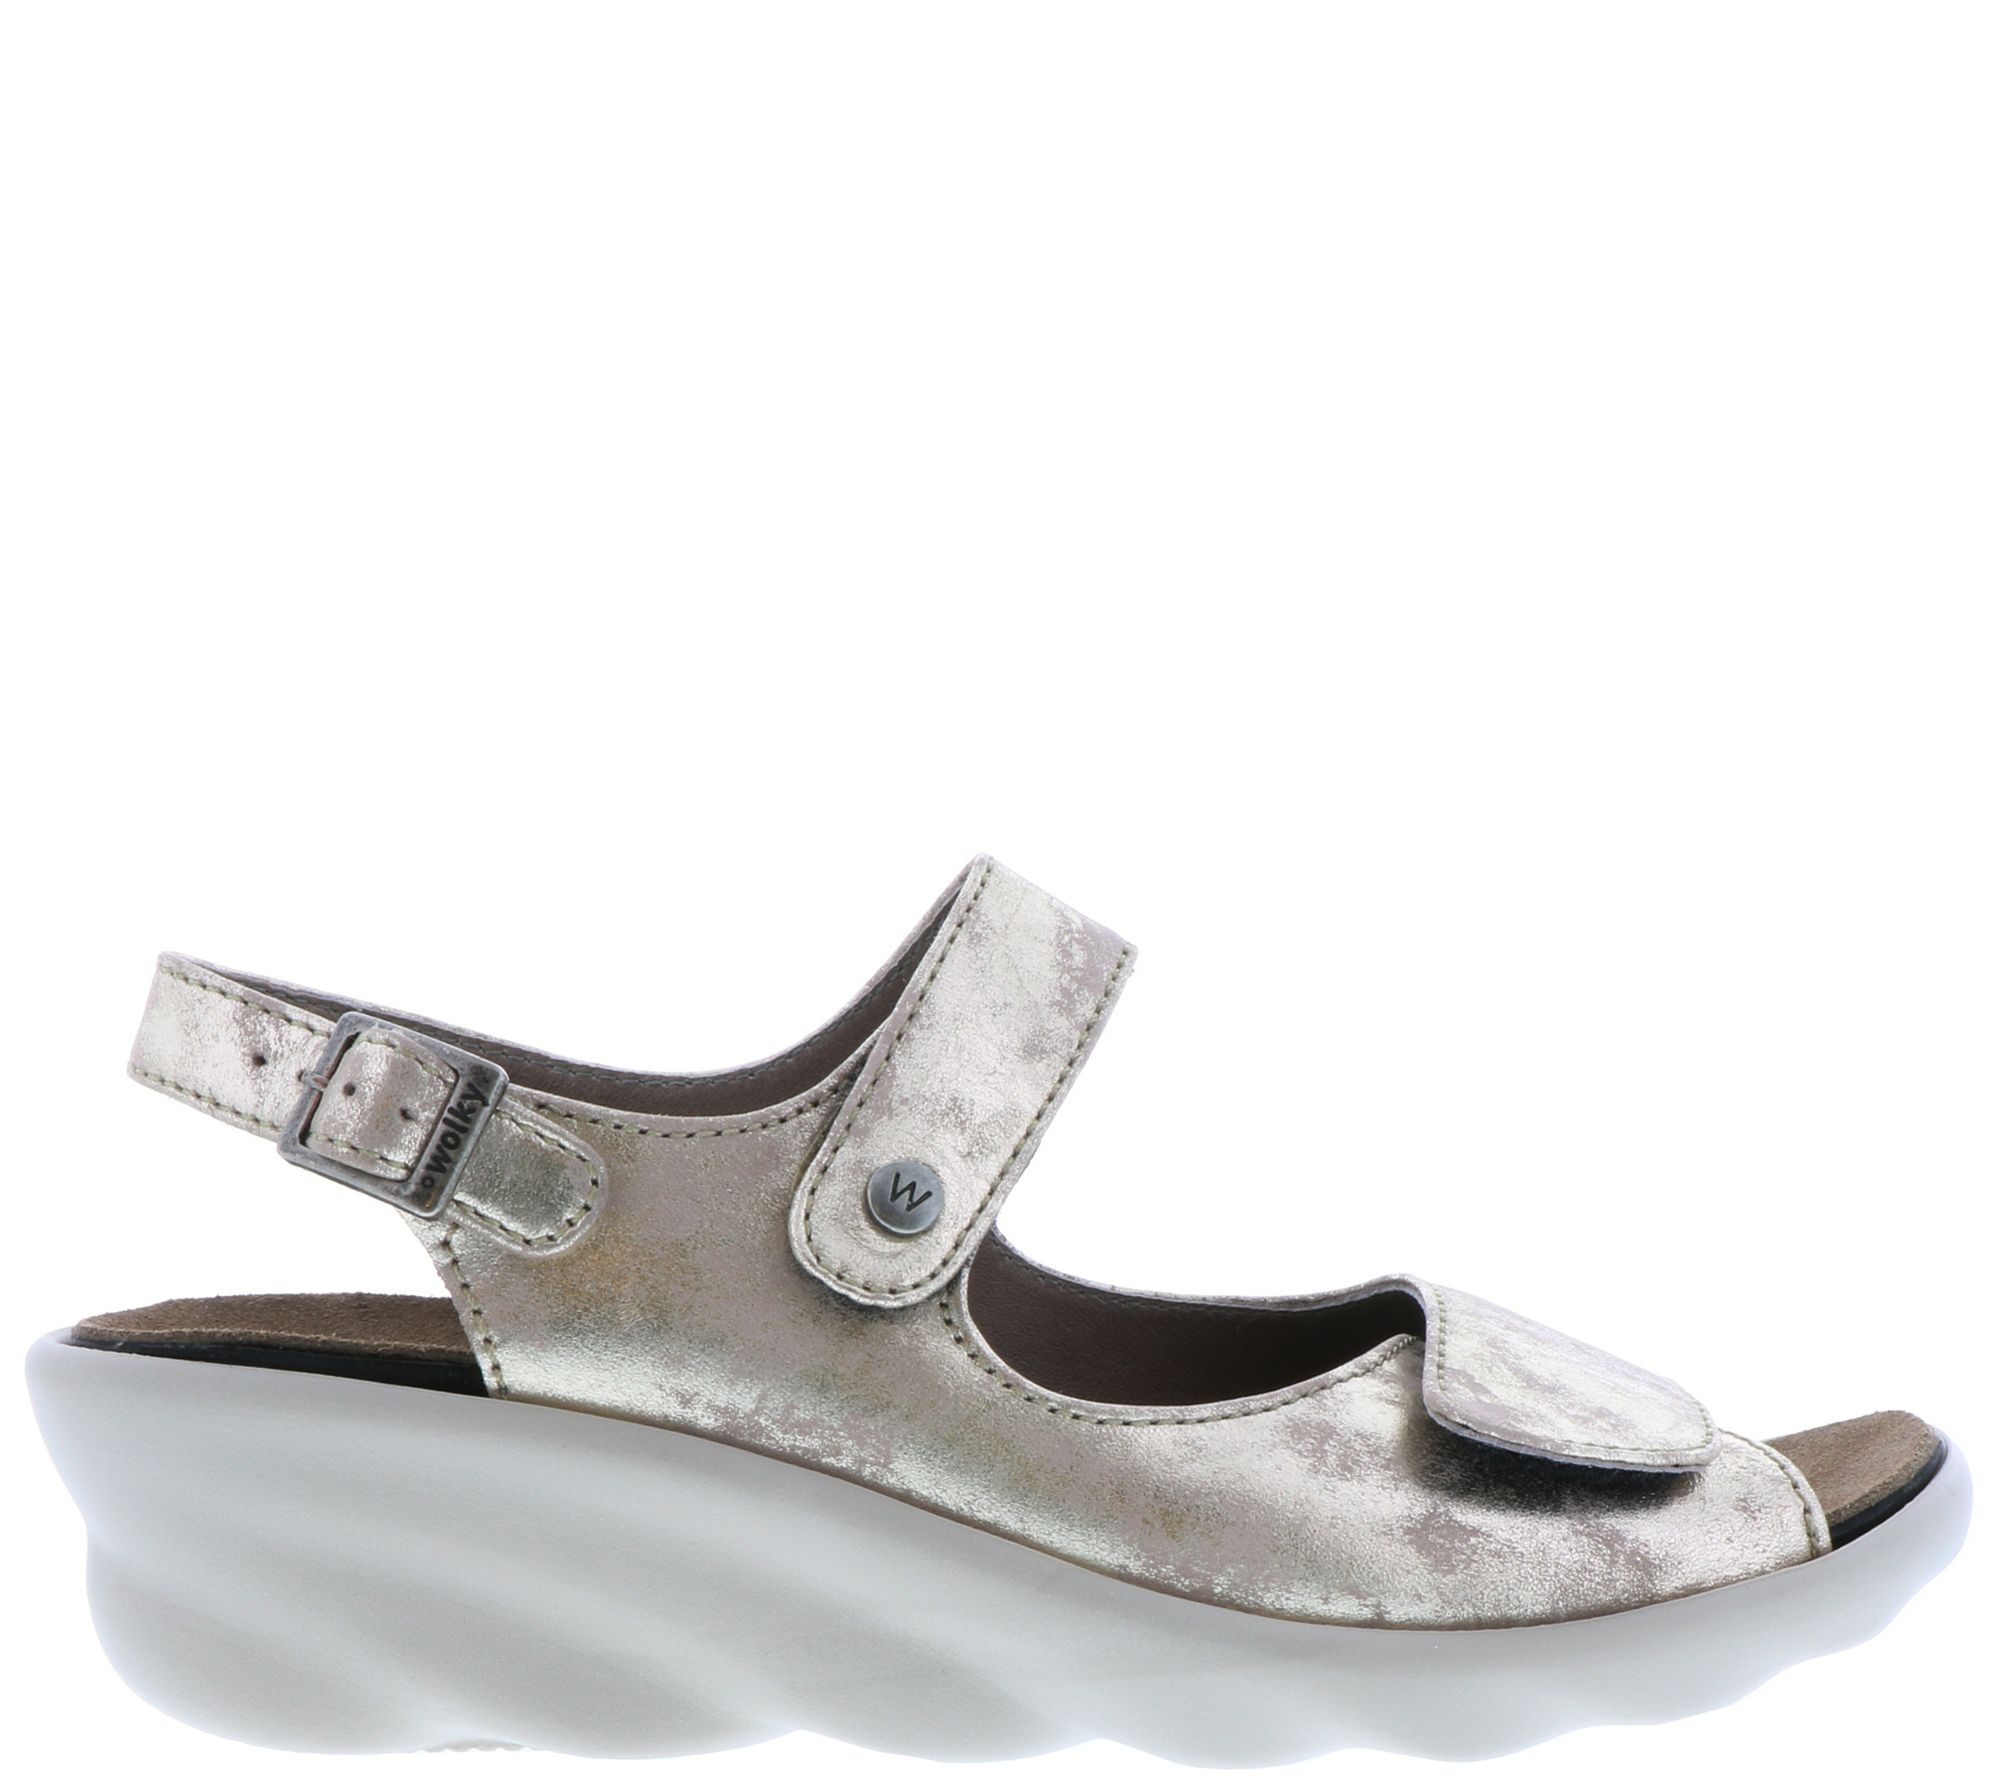 Wolky Leather Sandals with Removable Footbed -Scala - QVC.com